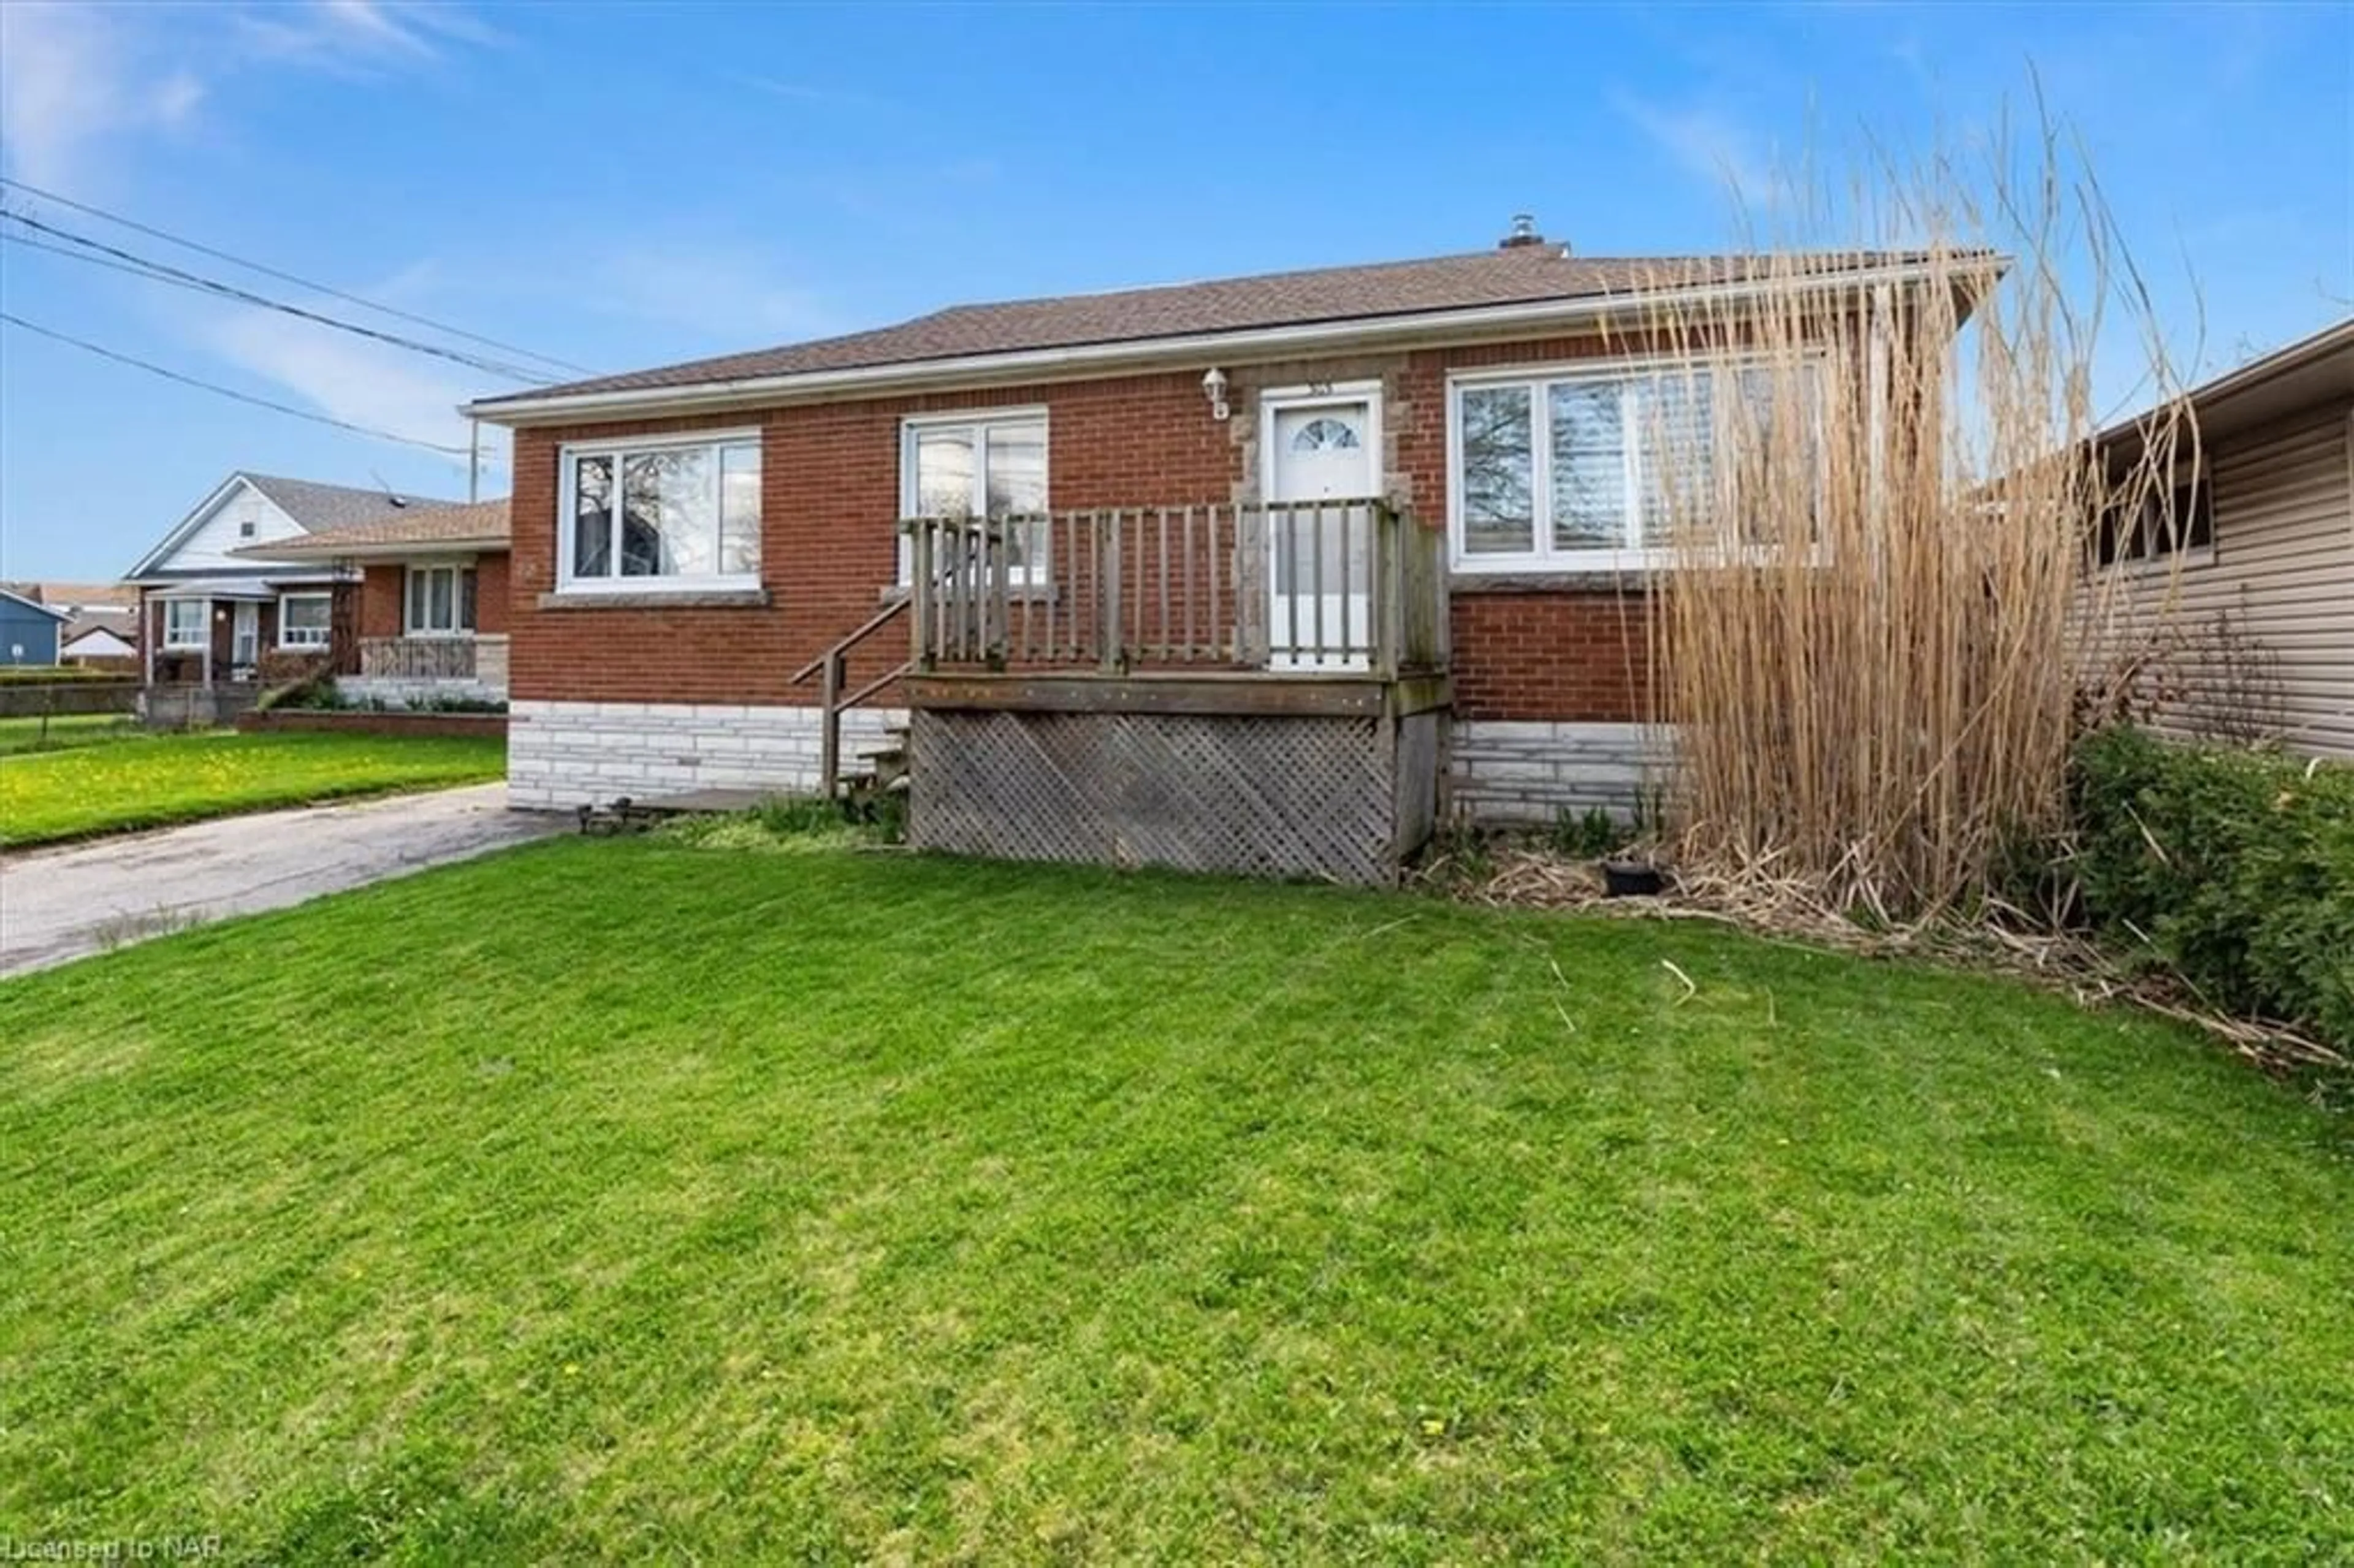 Frontside or backside of a home for 303 Grantham Ave, St. Catharines Ontario L2M 5A3